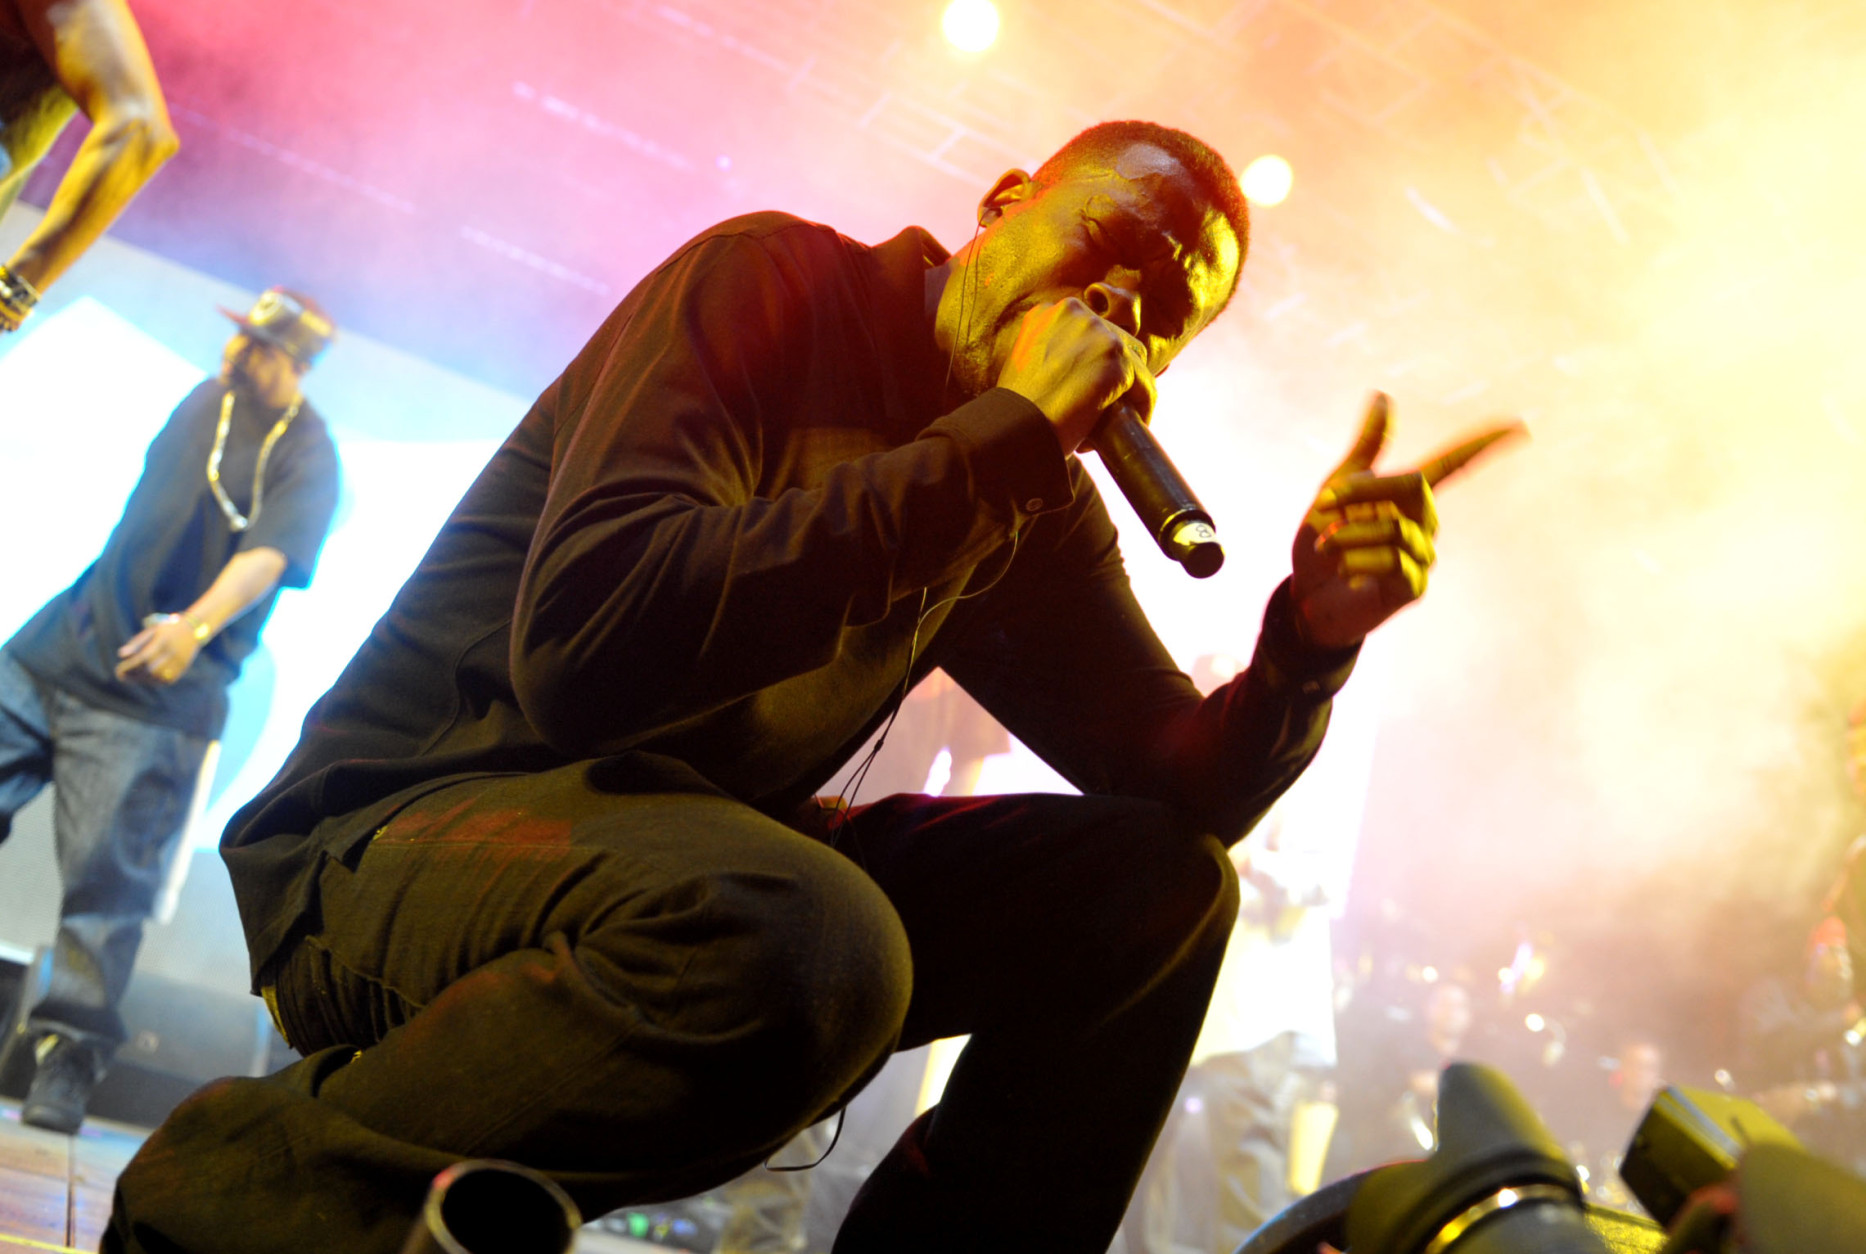 Gary Grice, aka GZA, of Wu-Tang Clan performs at the second weekend of the 2013 Coachella Valley Music and Arts Festival at the Empire Polo Club on Sunday, April 21, 2013 in Indio, Calif. . (Photo by John Shearer/Invision/AP)